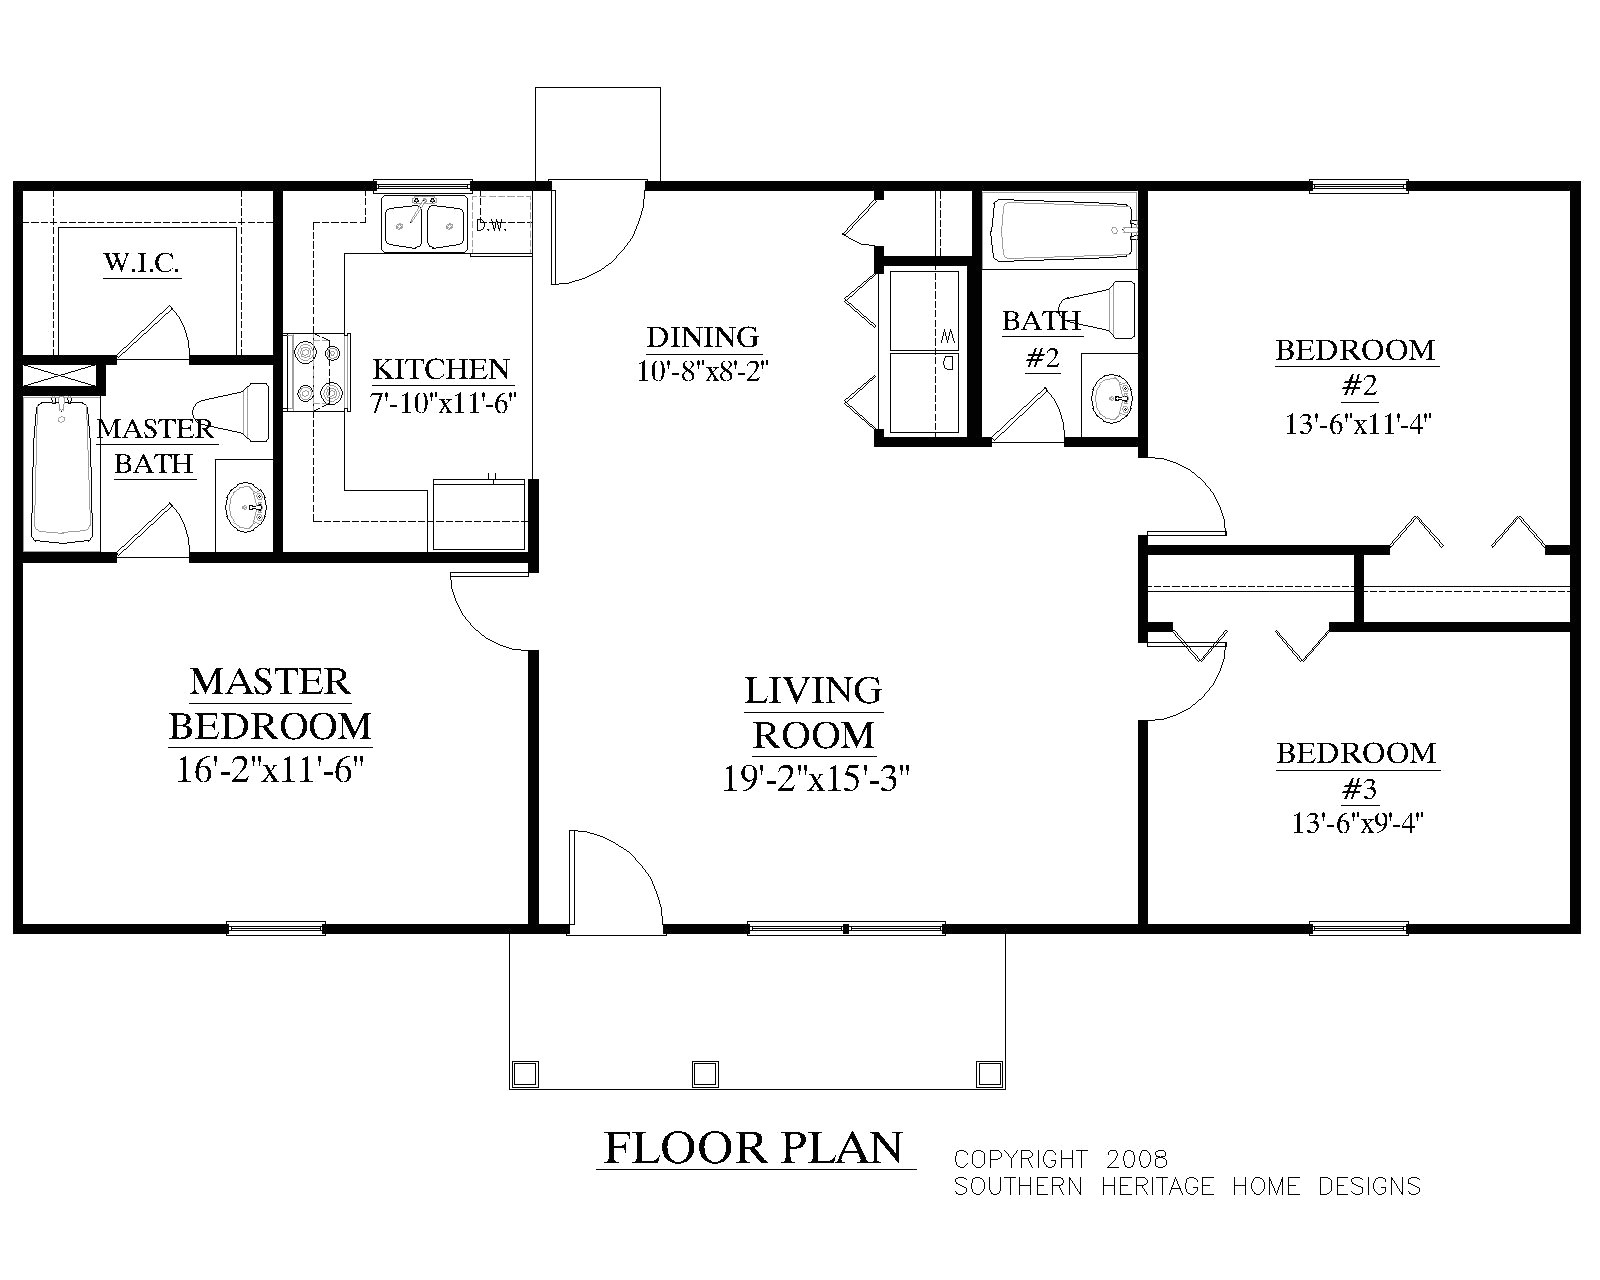 2000 sq ft ranch home floor plans